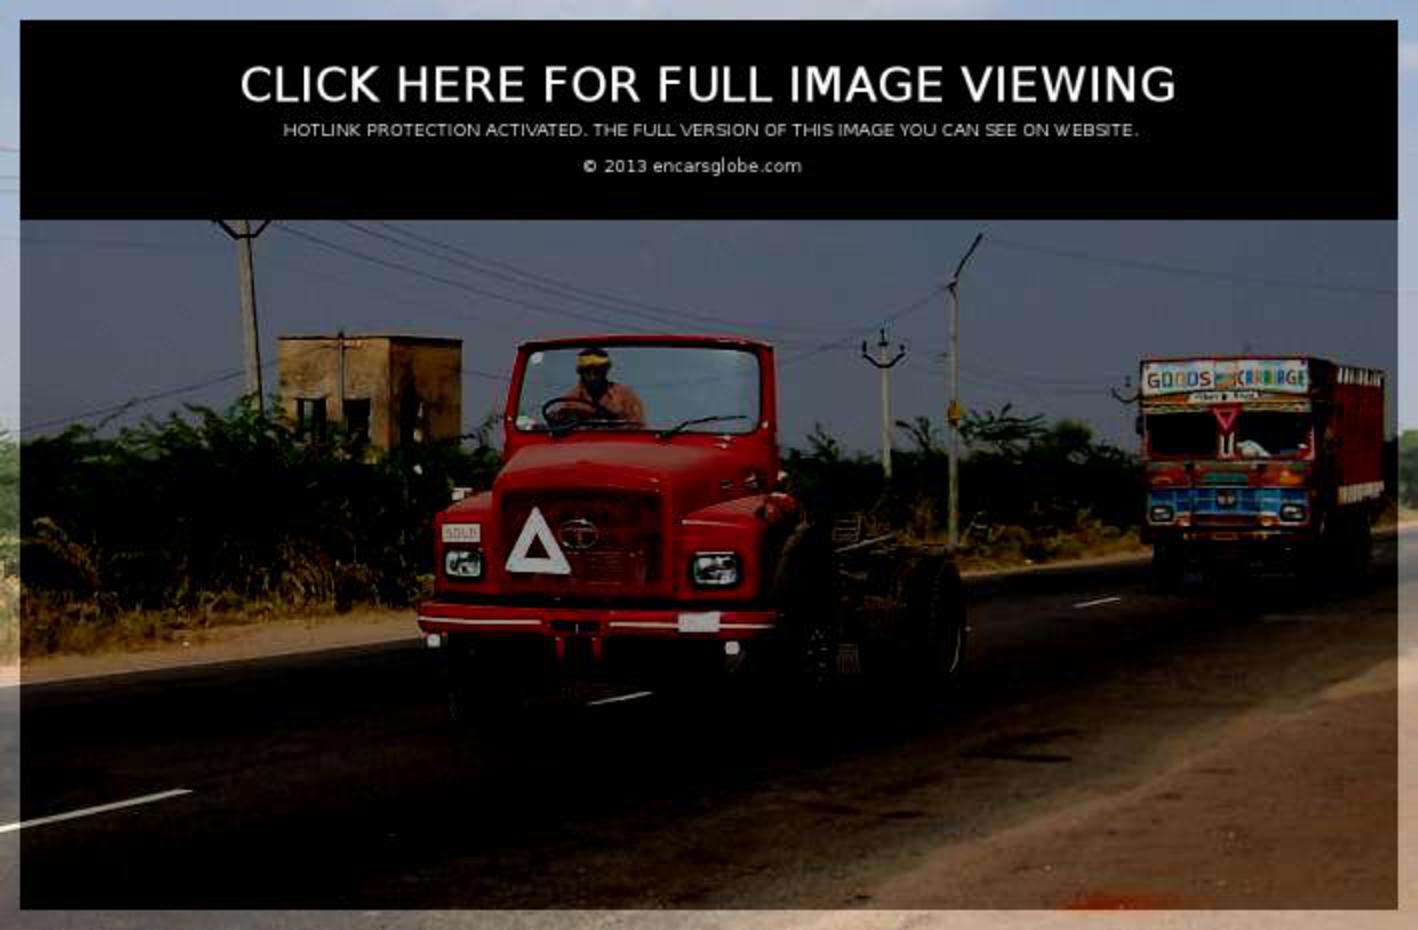 Tata 1613 SE: Photo gallery, complete information about model ...